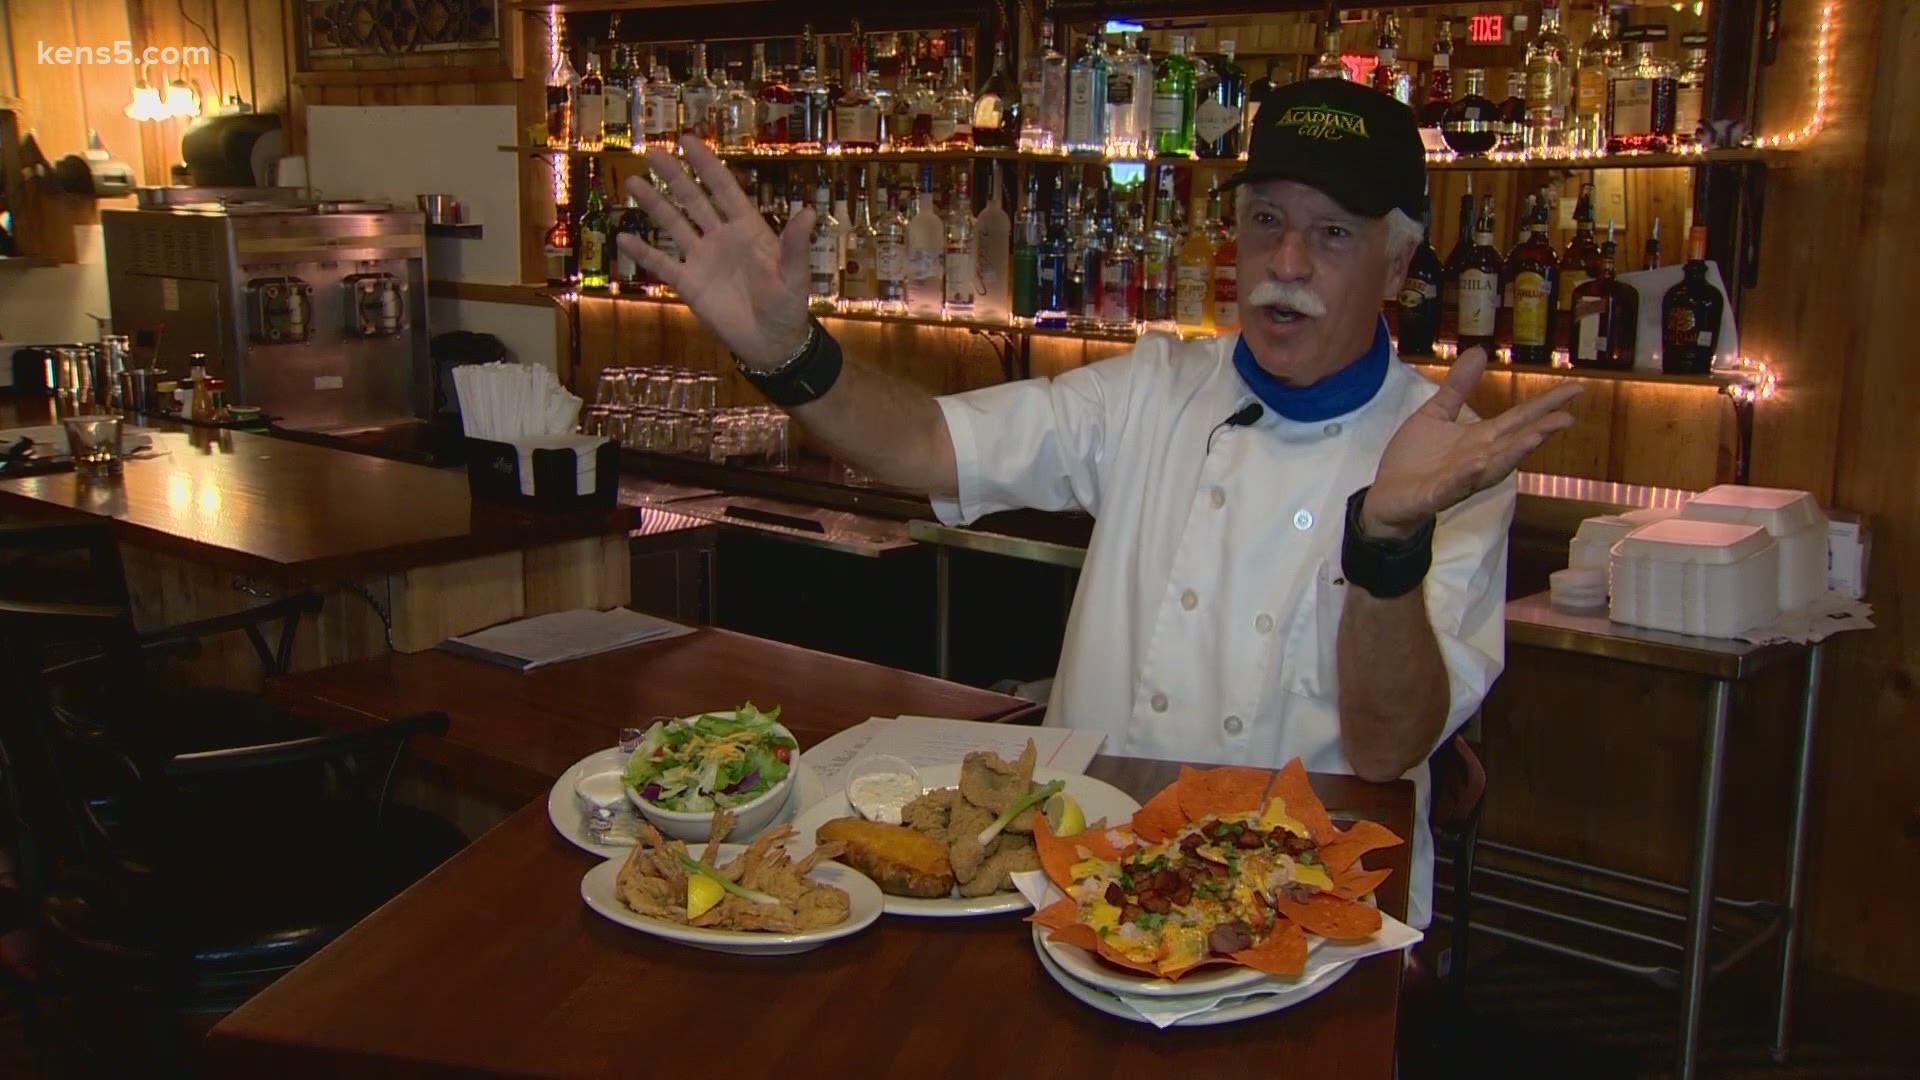 Dave Saylor has run Acadiana Café in SA for 34 years. He's hoping to get some of the $4 million available in grants, but Bexar County got $22 million in requests.